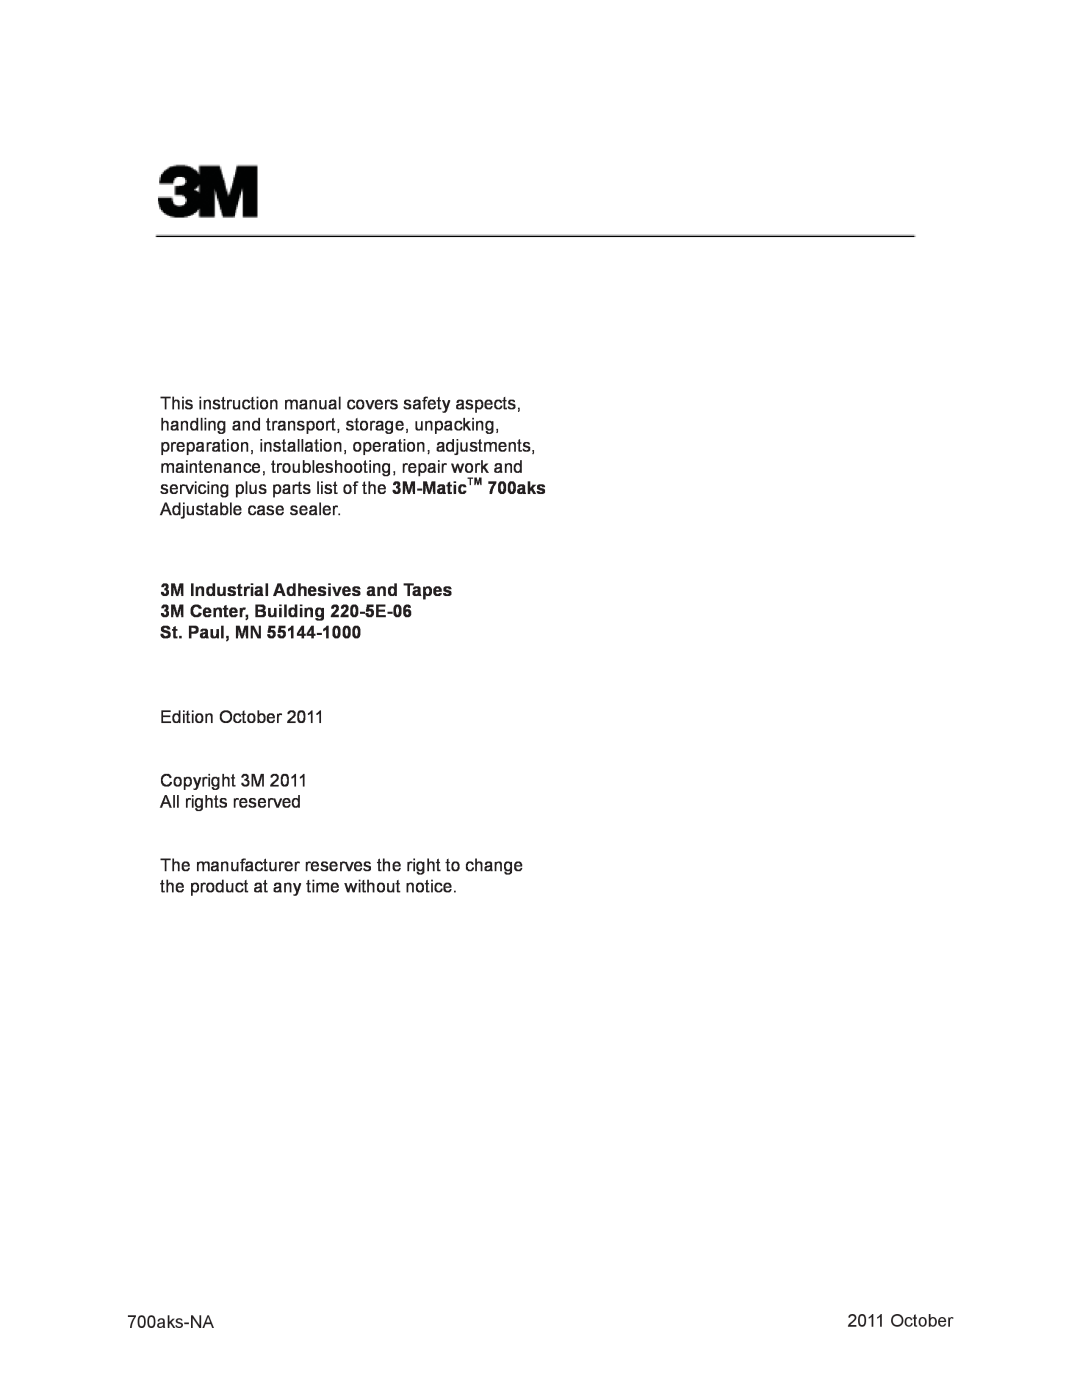 3M 40800 operating instructions 3M Industrial Adhesives and Tapes, 3M Center, Building 220-5E-06 St. Paul, MN 